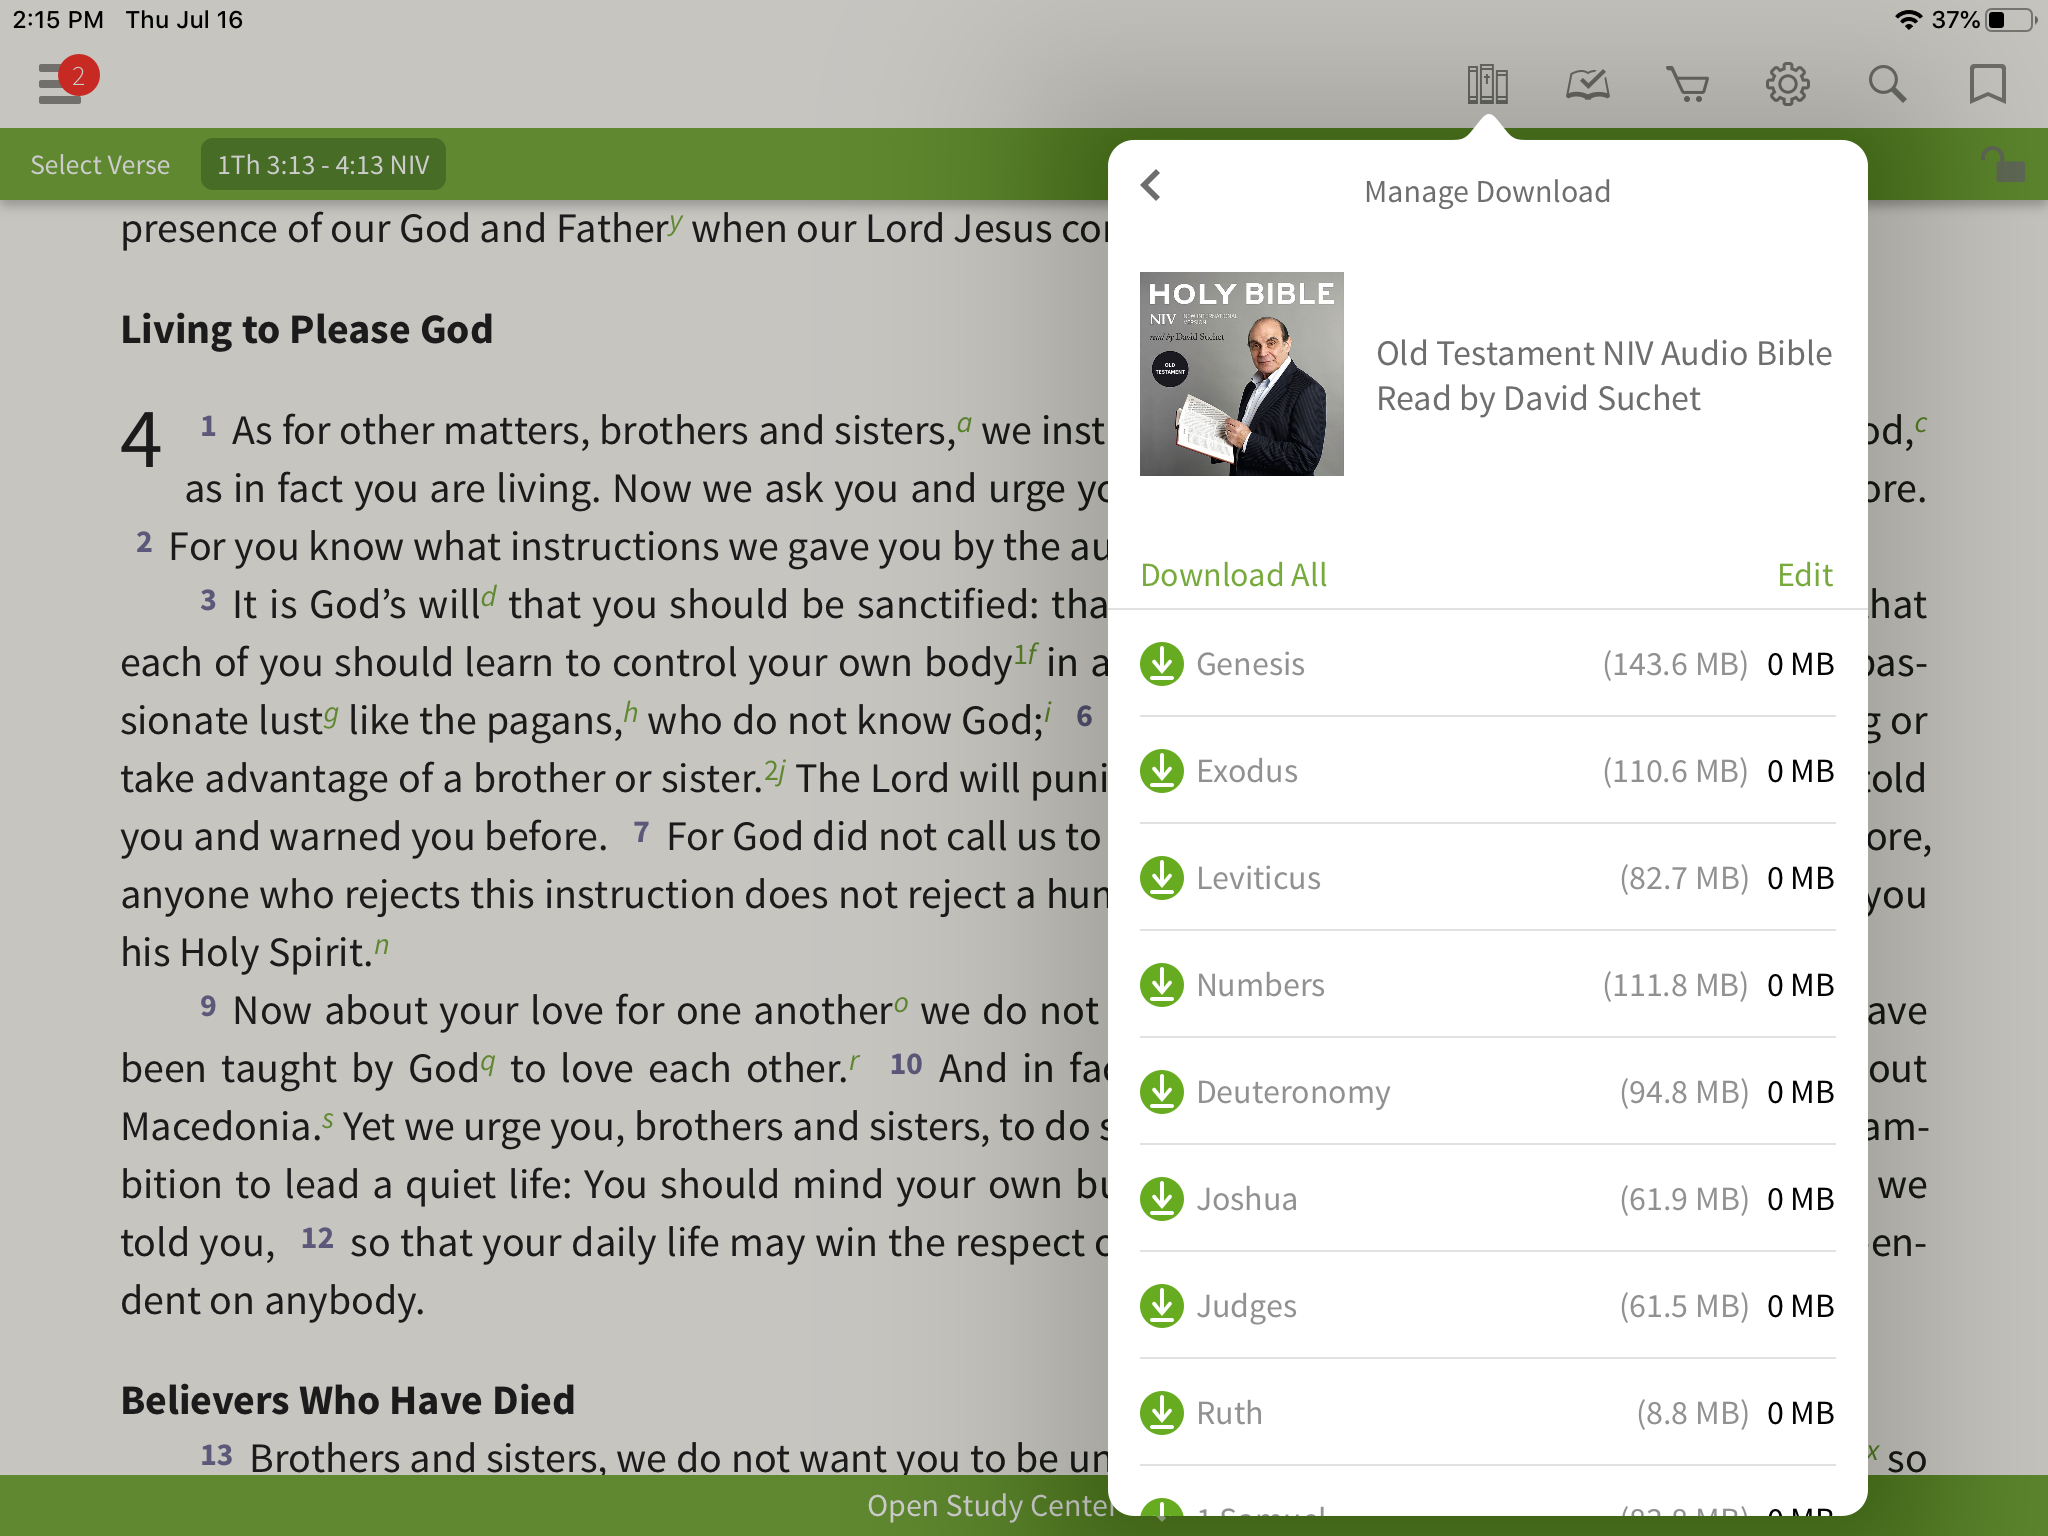 Downloading audio Bibles in the Olive Tree Bible App